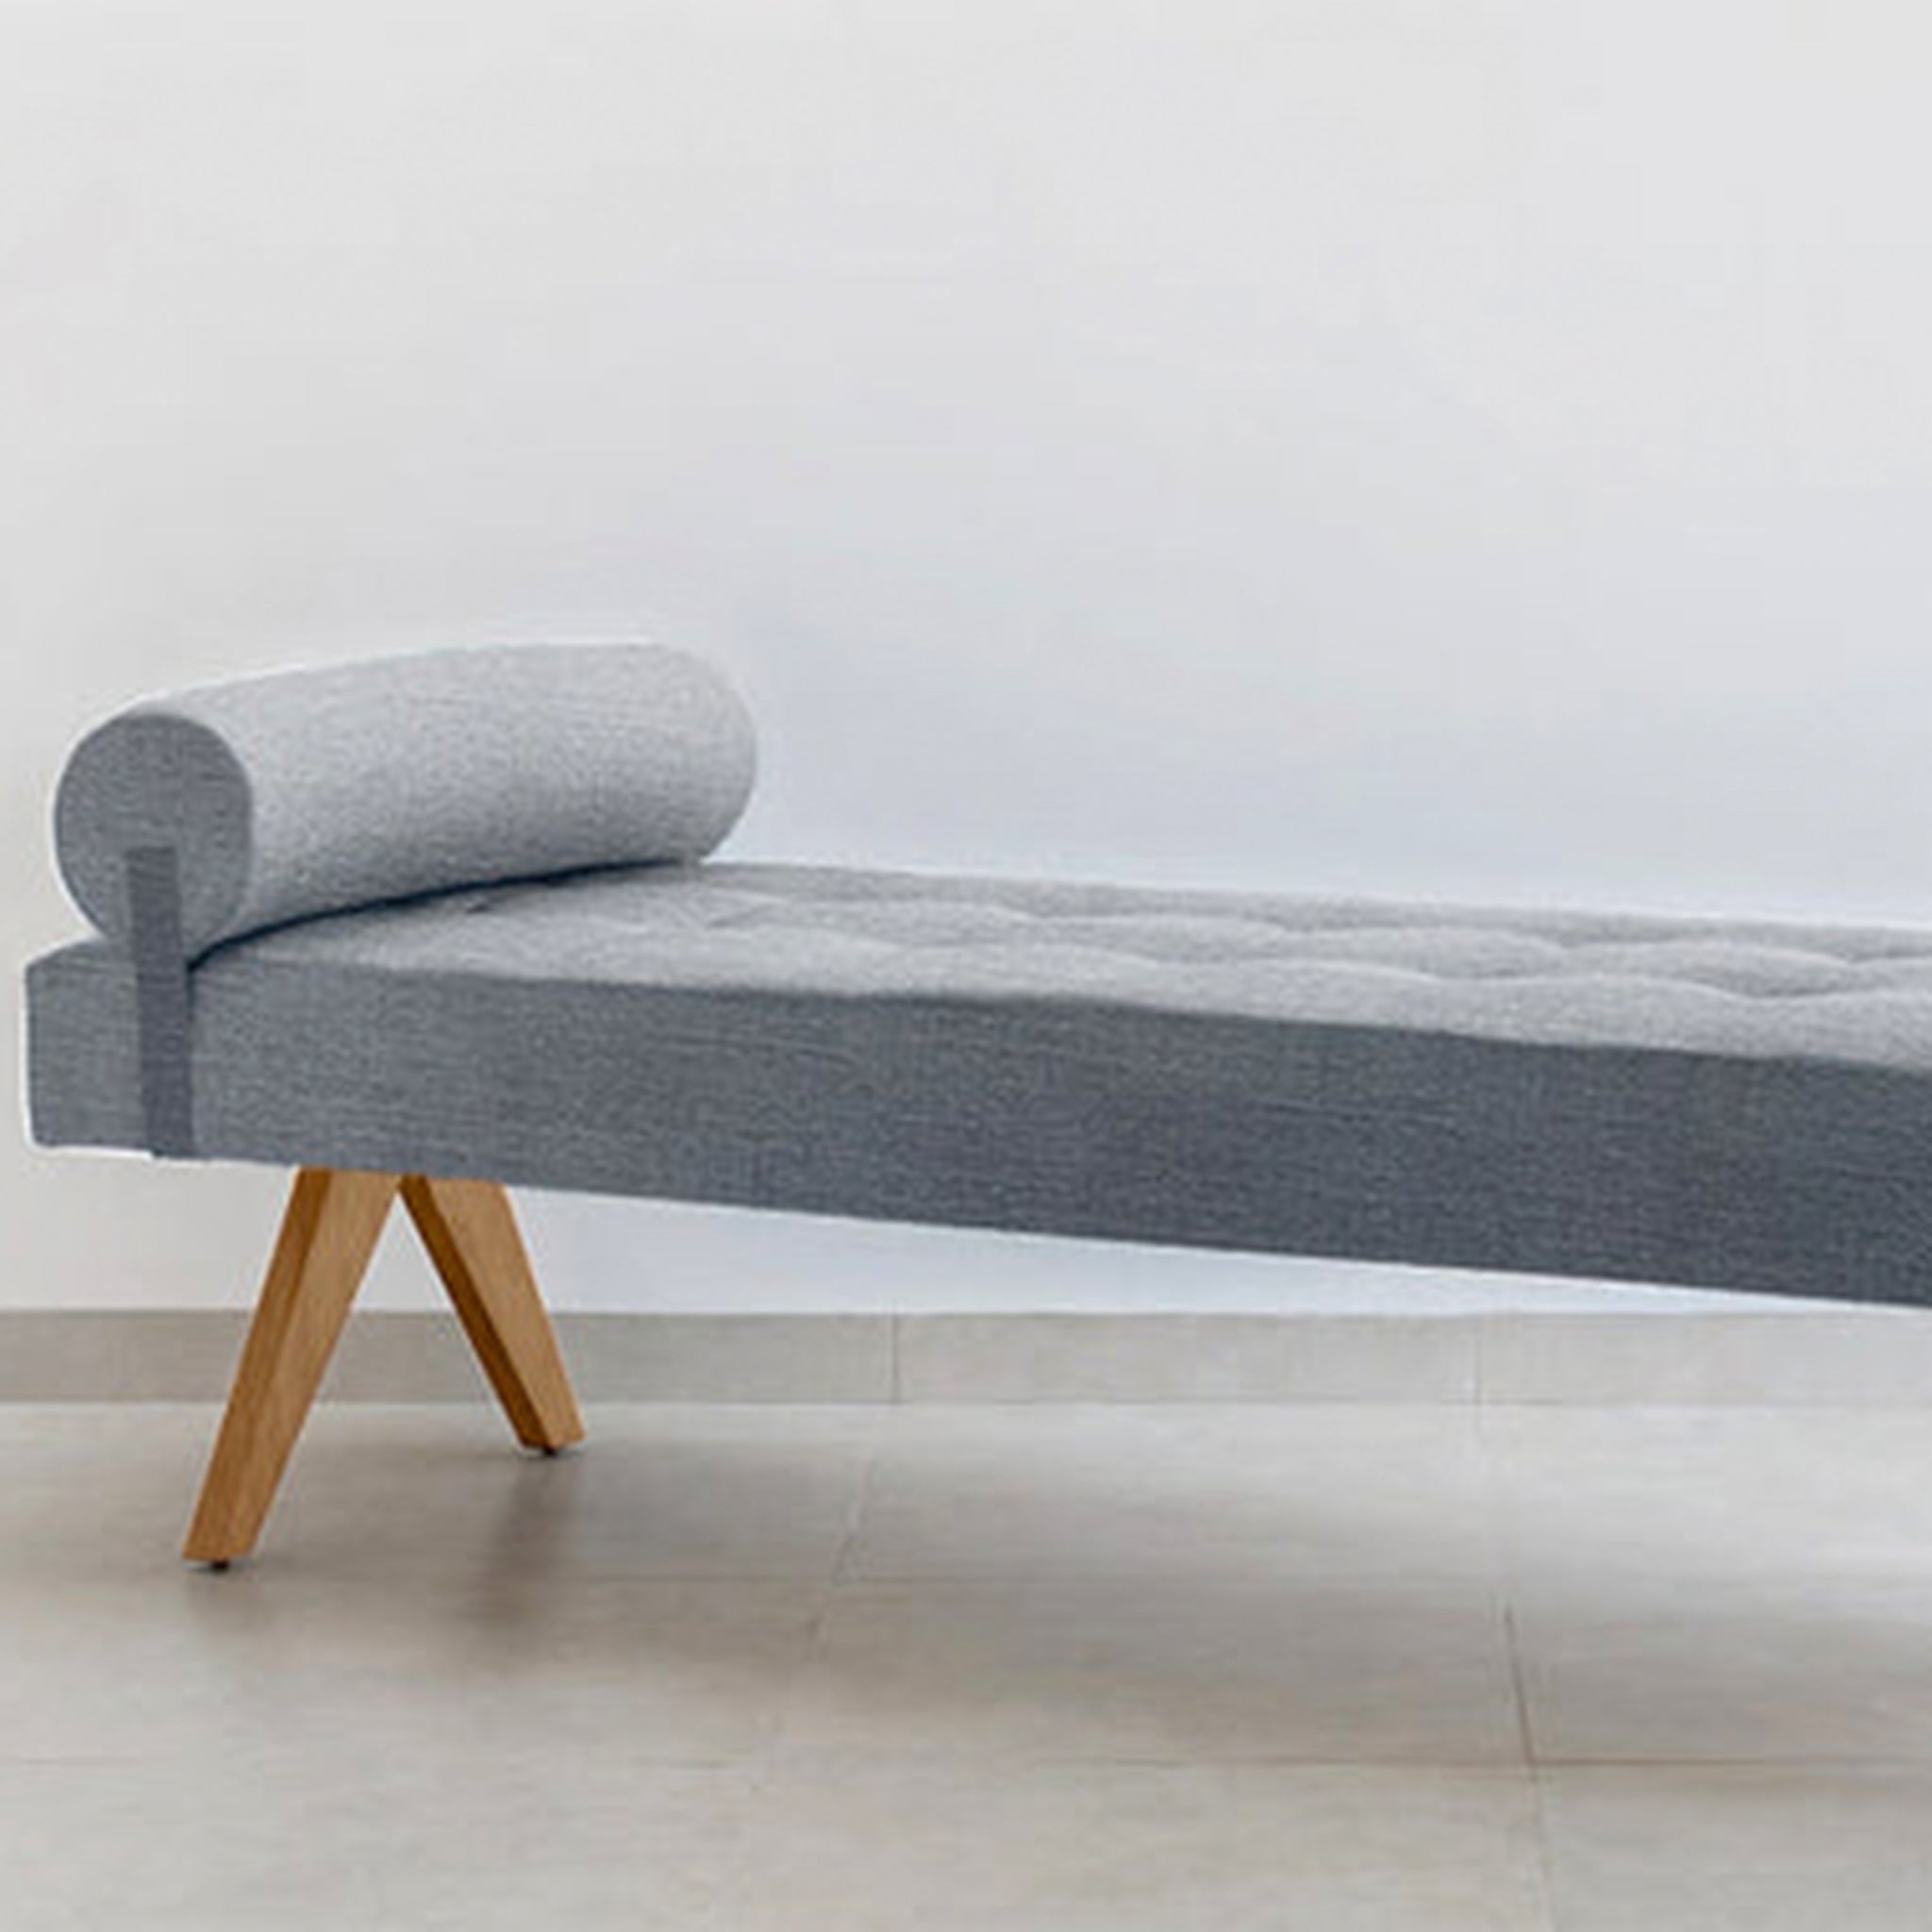 The Jack Daybed with a simple yet elegant design